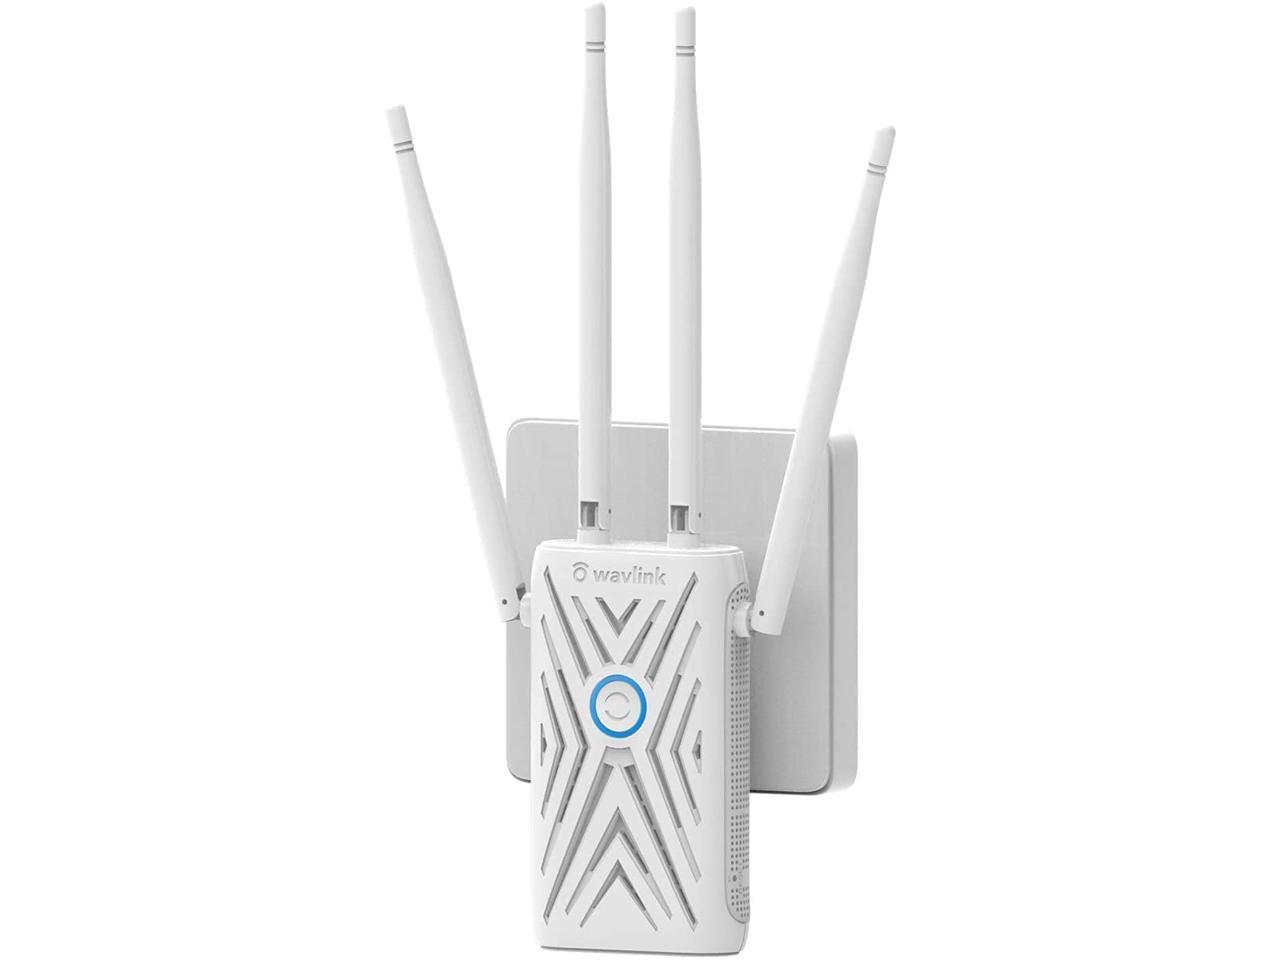 1200 Mbps WiFi Router Range Extender Signal Booster Repeater Access Point and WISP Client Modes Super-Fast 2.4 & 5 G Dual Band with 4 High Gain Antennas and 2 LAN/WAN Ports